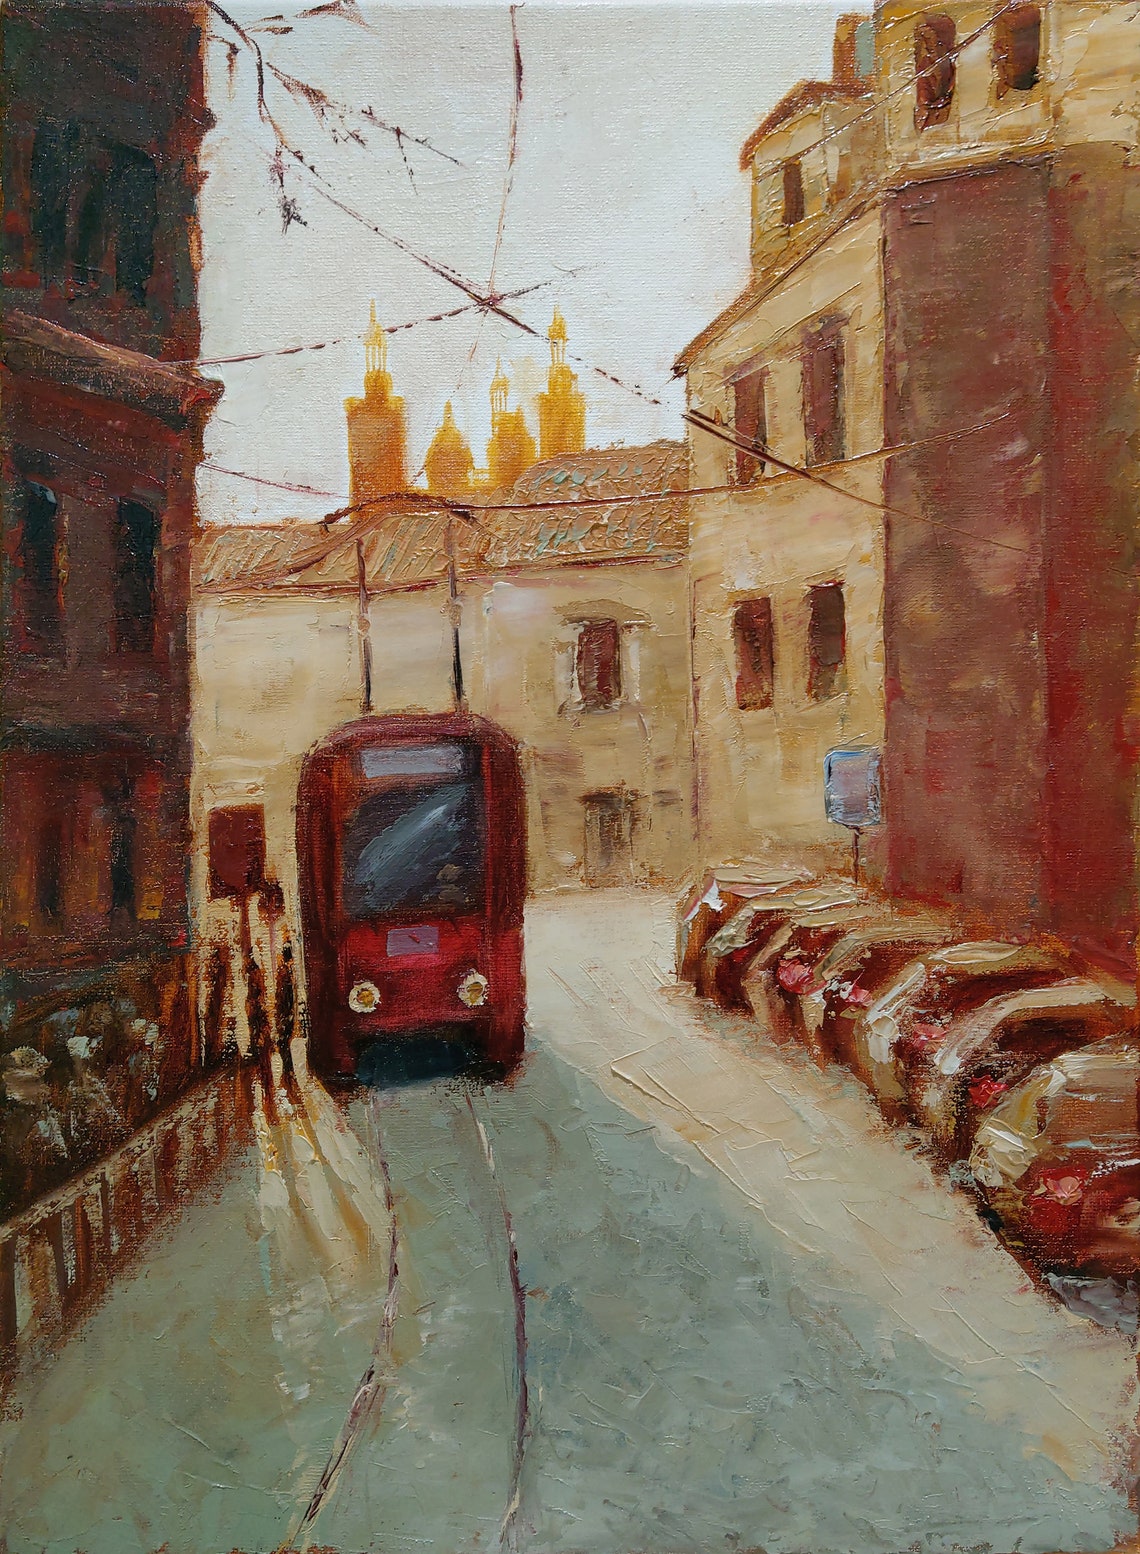 Tram Handmade Original Oil Painting Art On Stretched Canvas Etsy